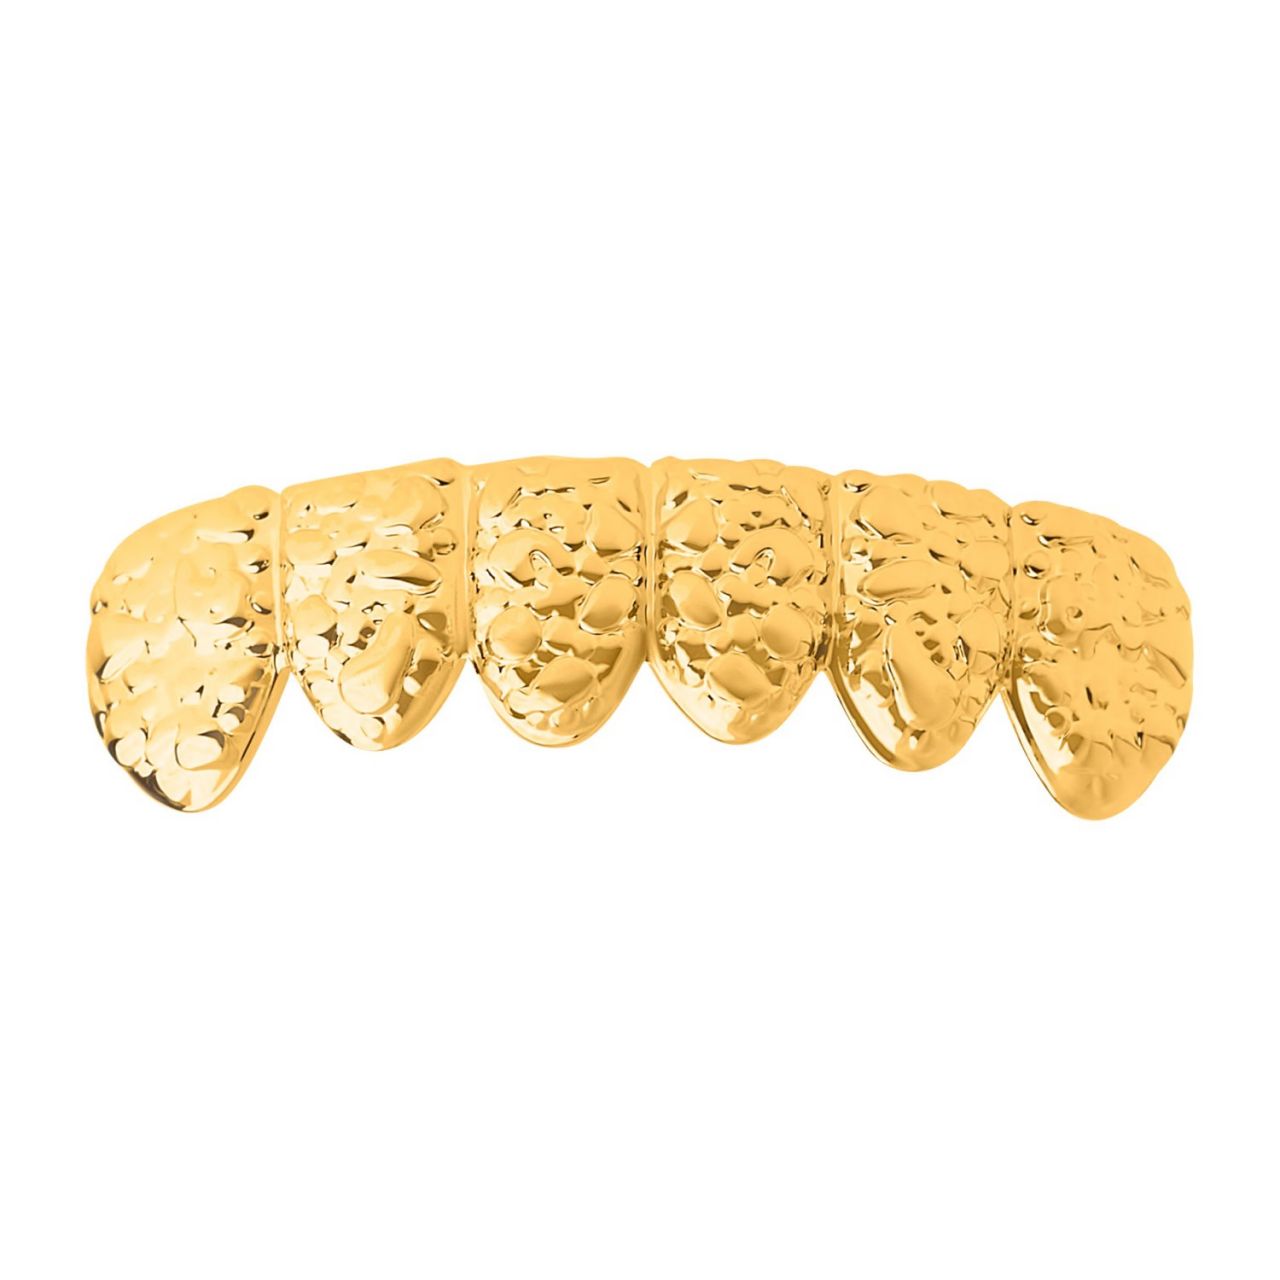 One size fits all Bottom Grillz – NUGGET gold